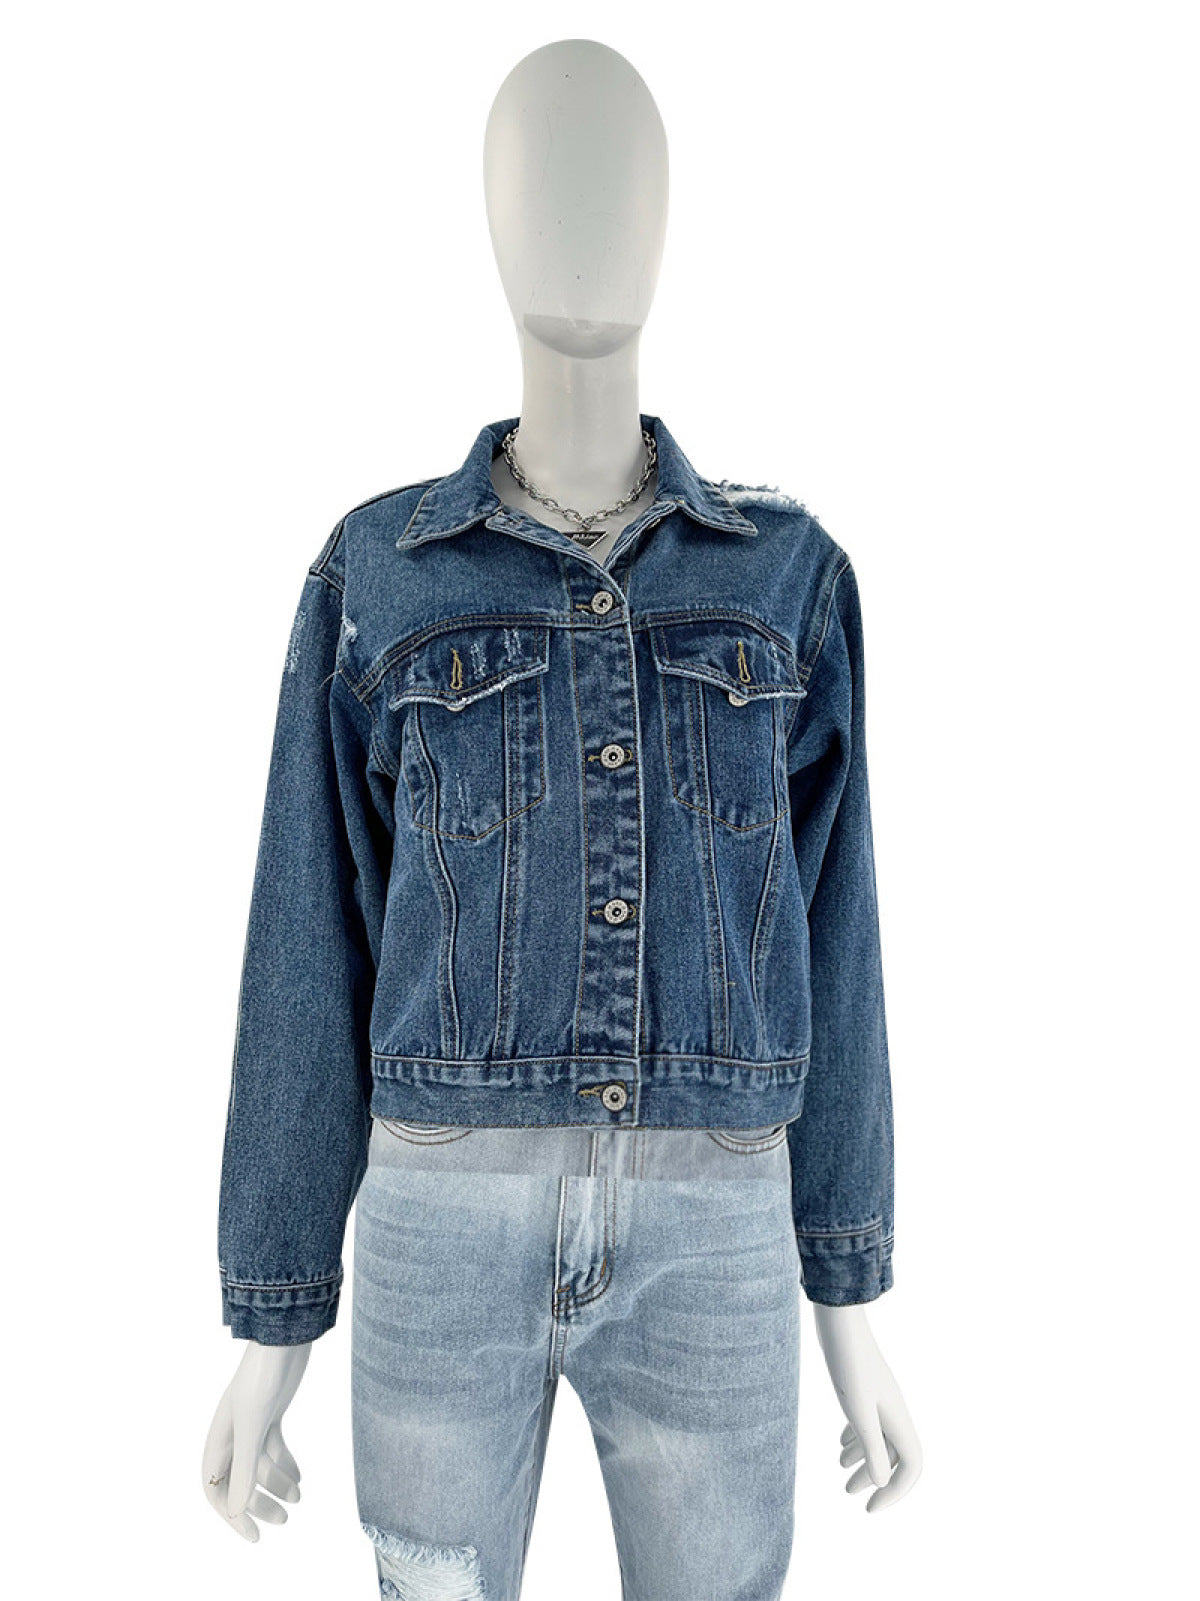 Casual Single-Breasted Denim Jacket With Pocket